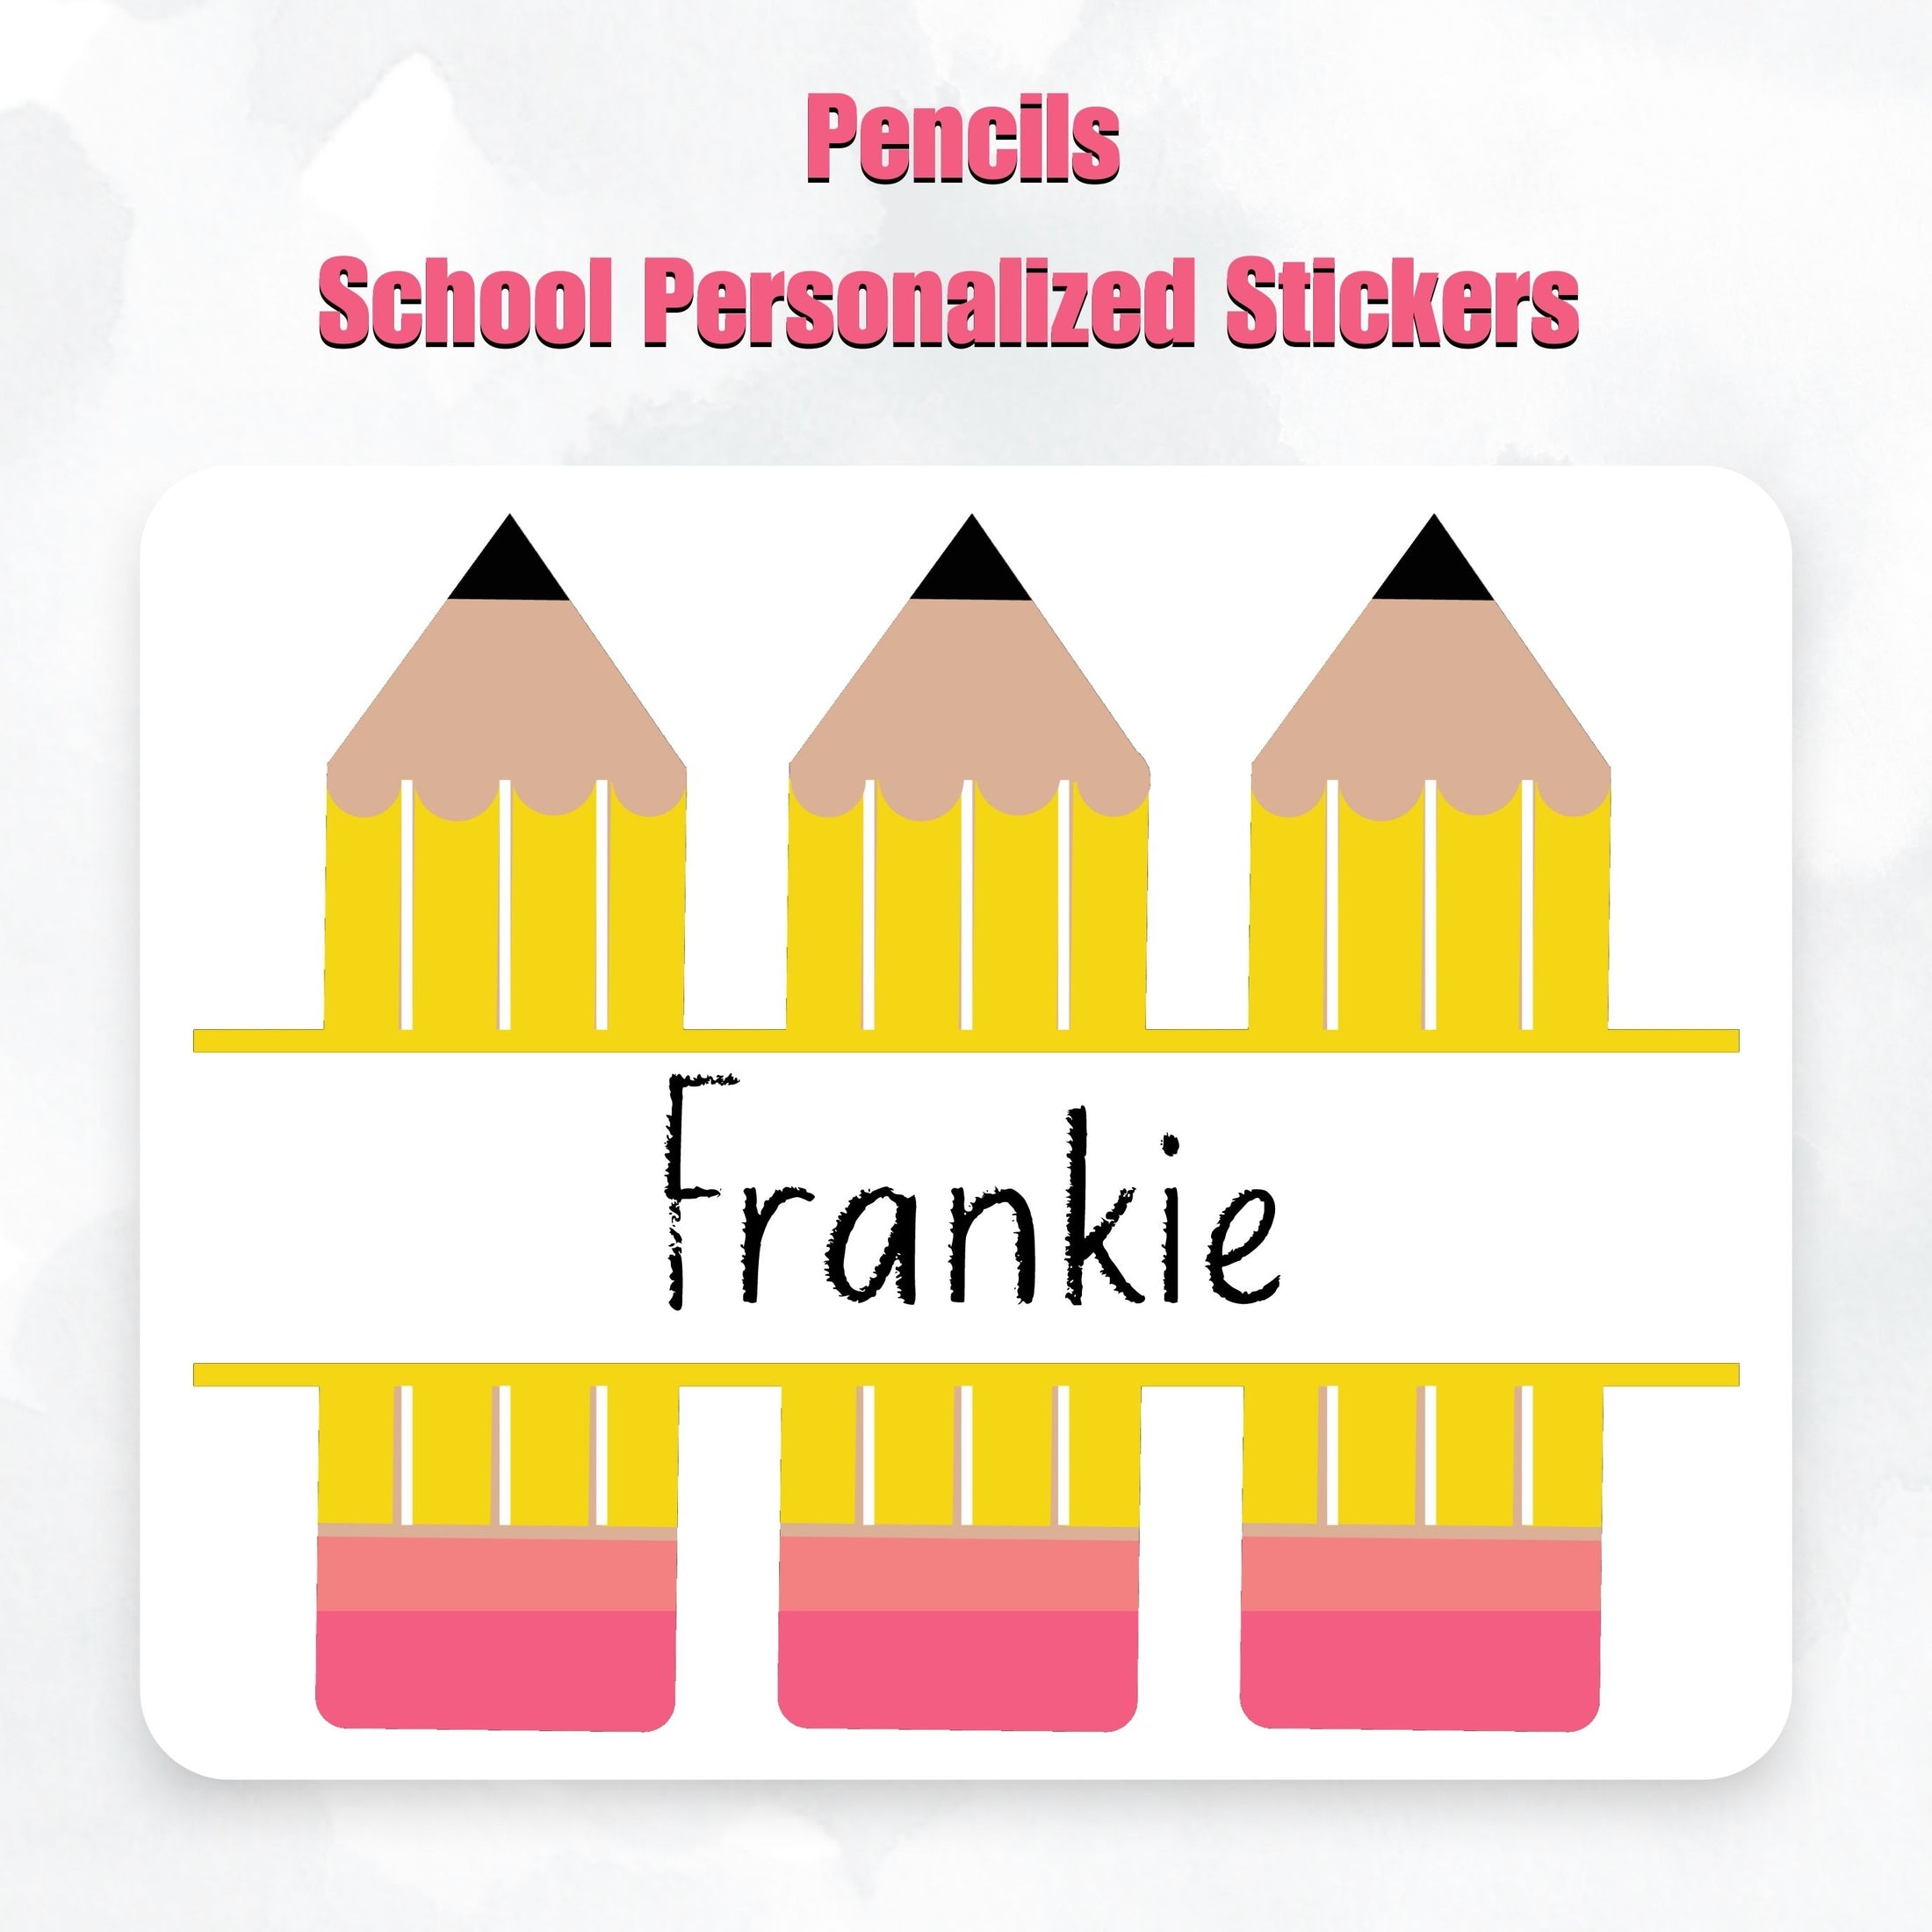 This cover image shows the personalized schooThis cover image shows the personalized school sticker on a cloudy background.l sticker on a cloudy background.